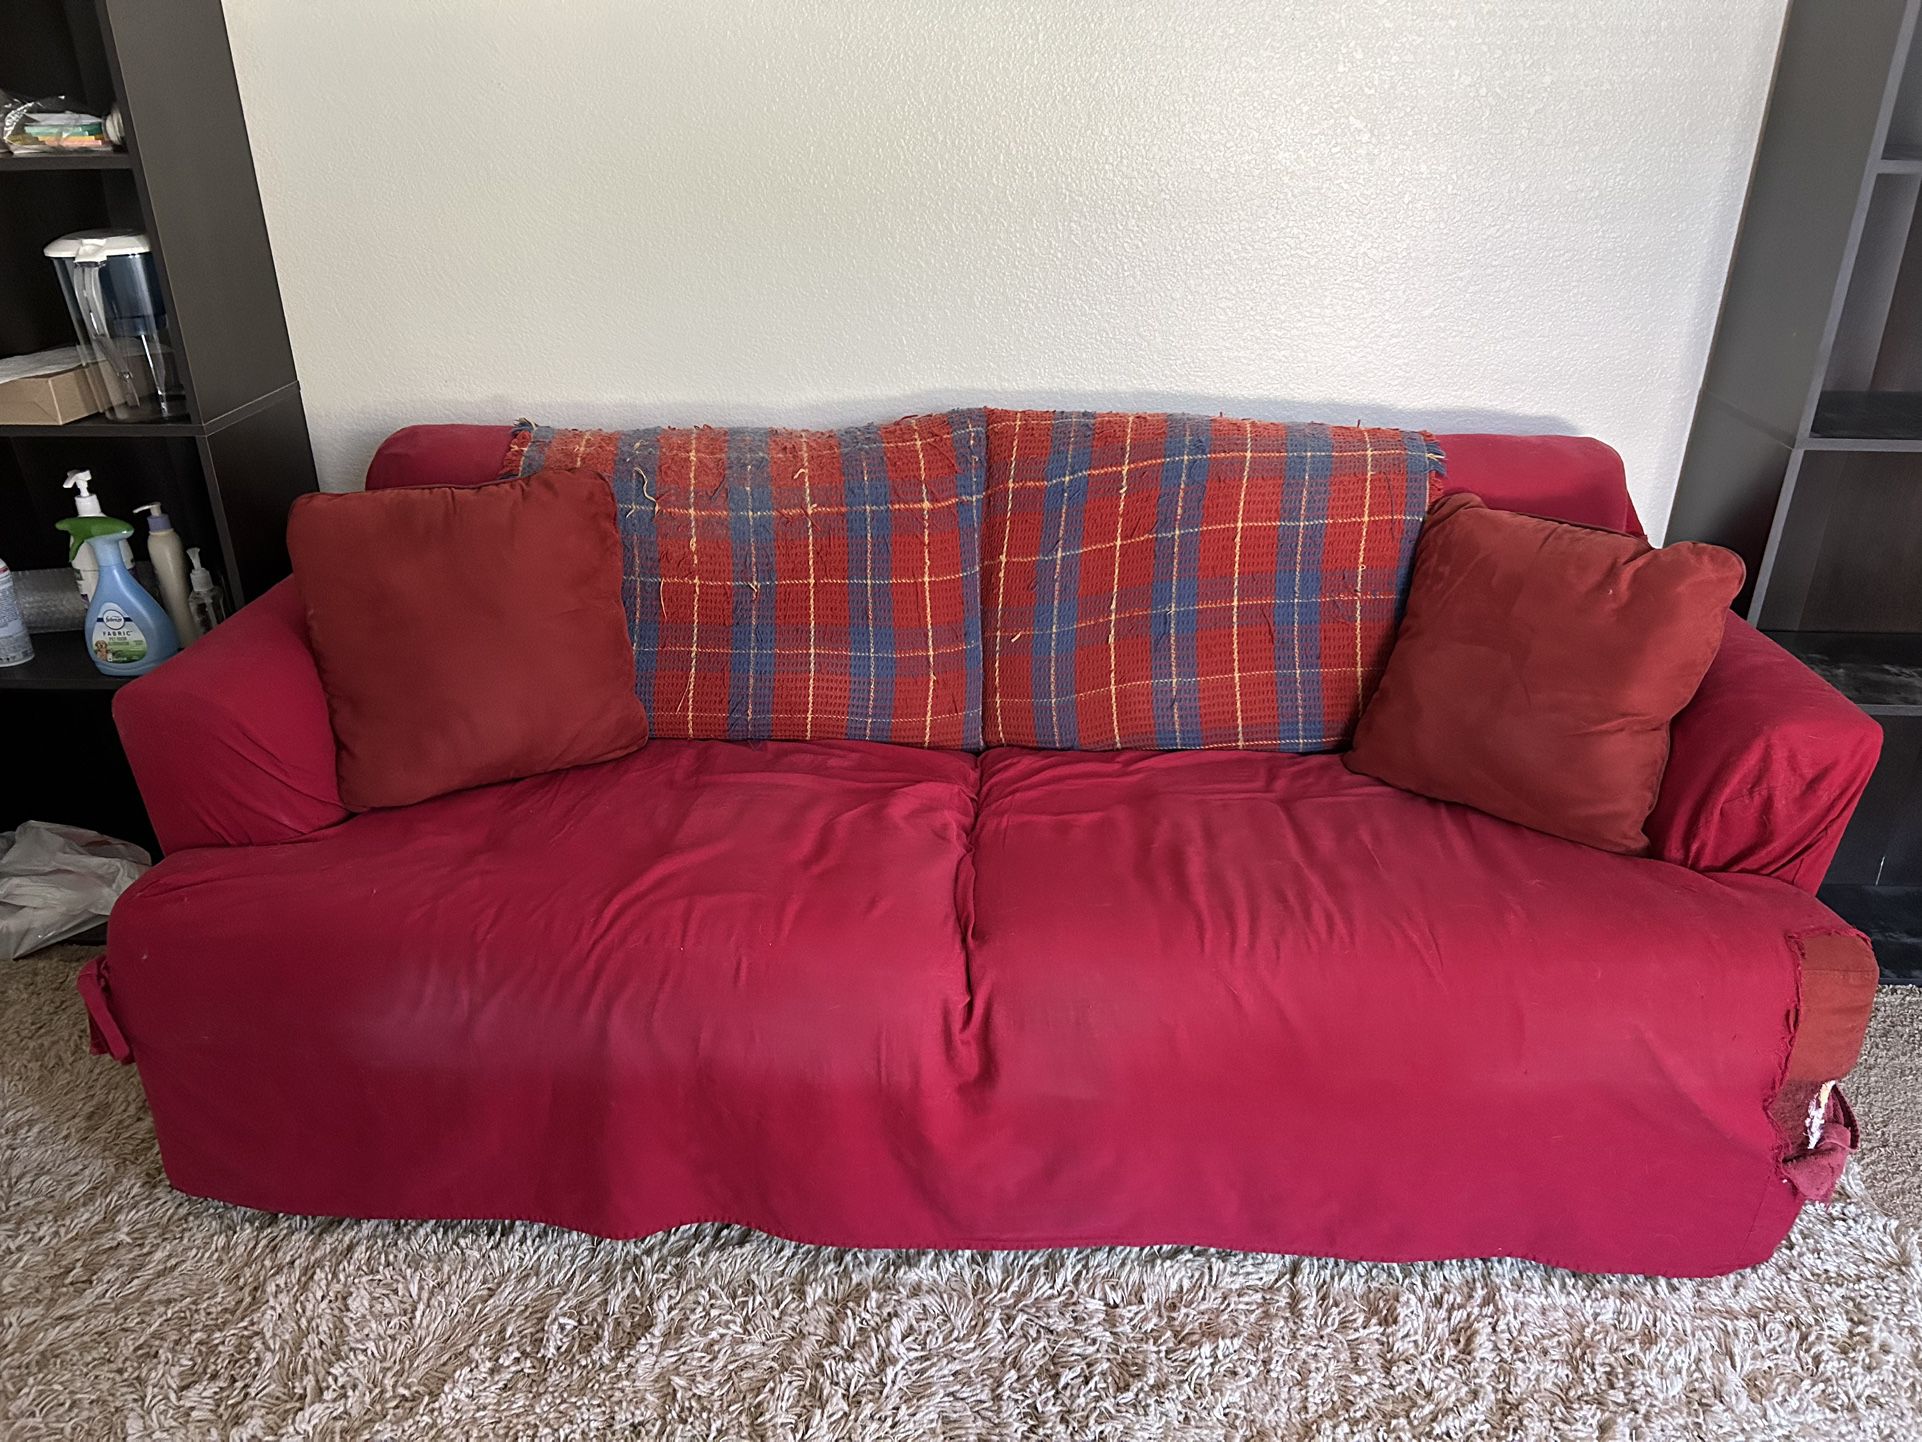 Quality Cushion Couch